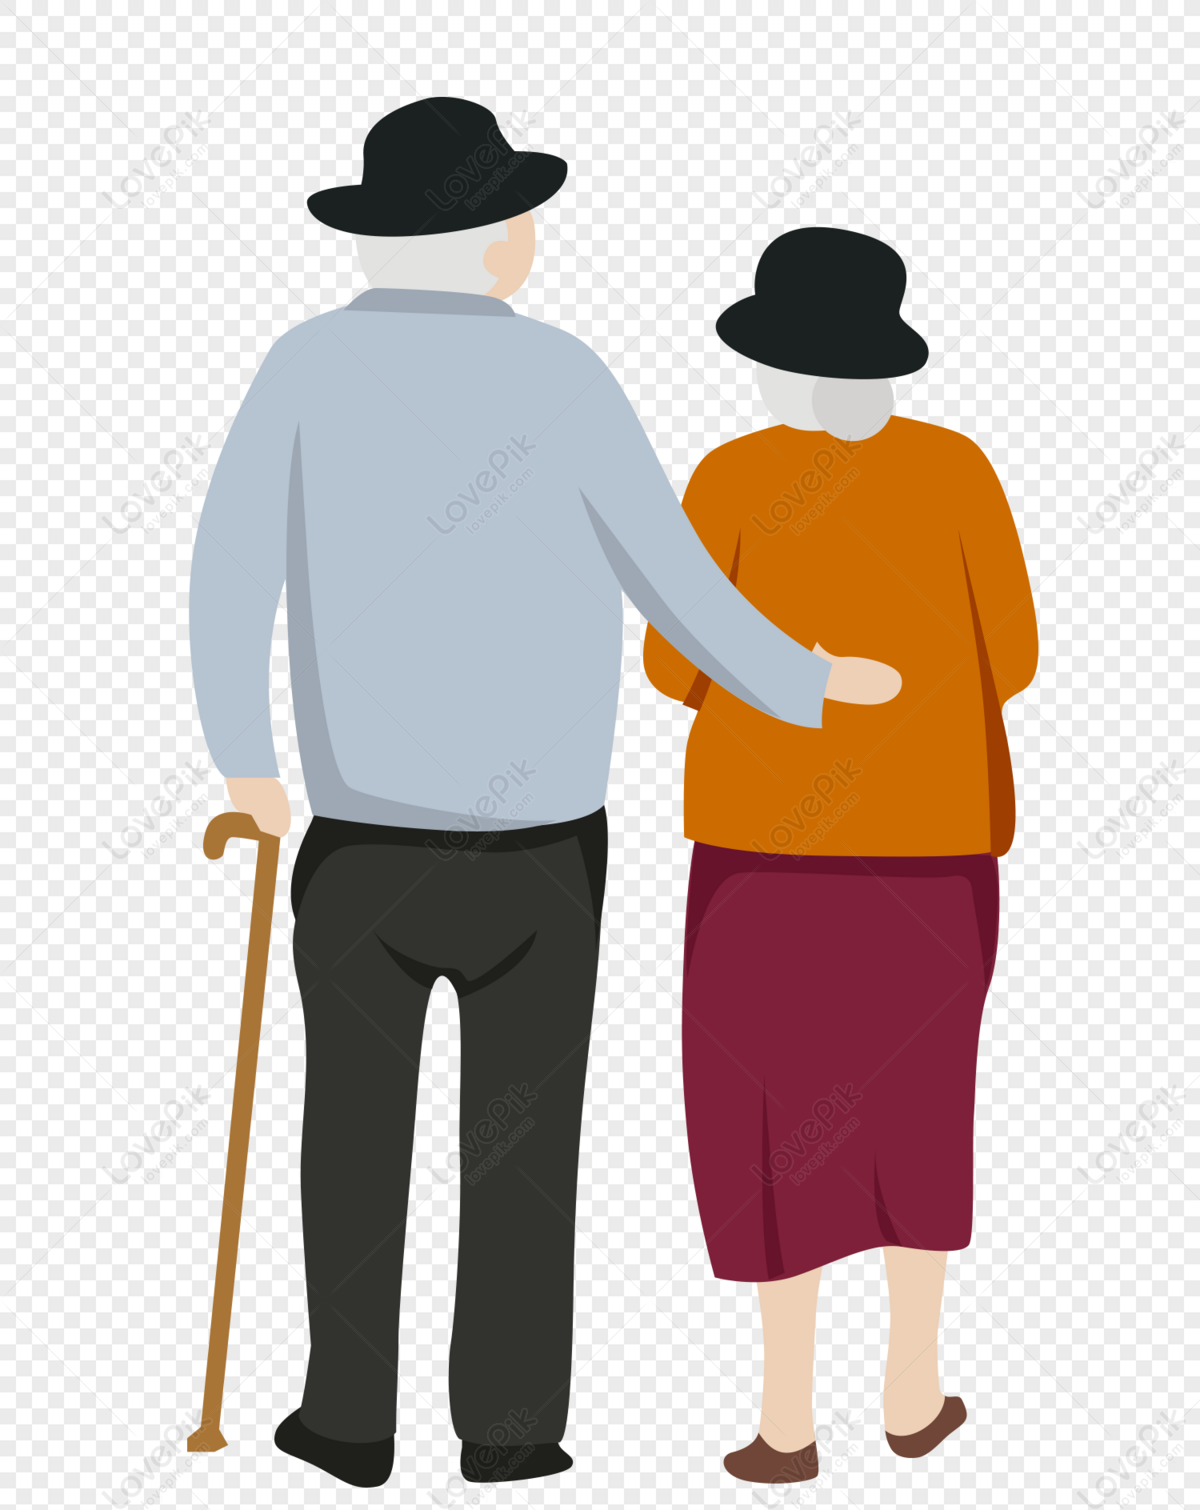 Figure Of The Old Man PNG Picture And Clipart Image For Free Download ...